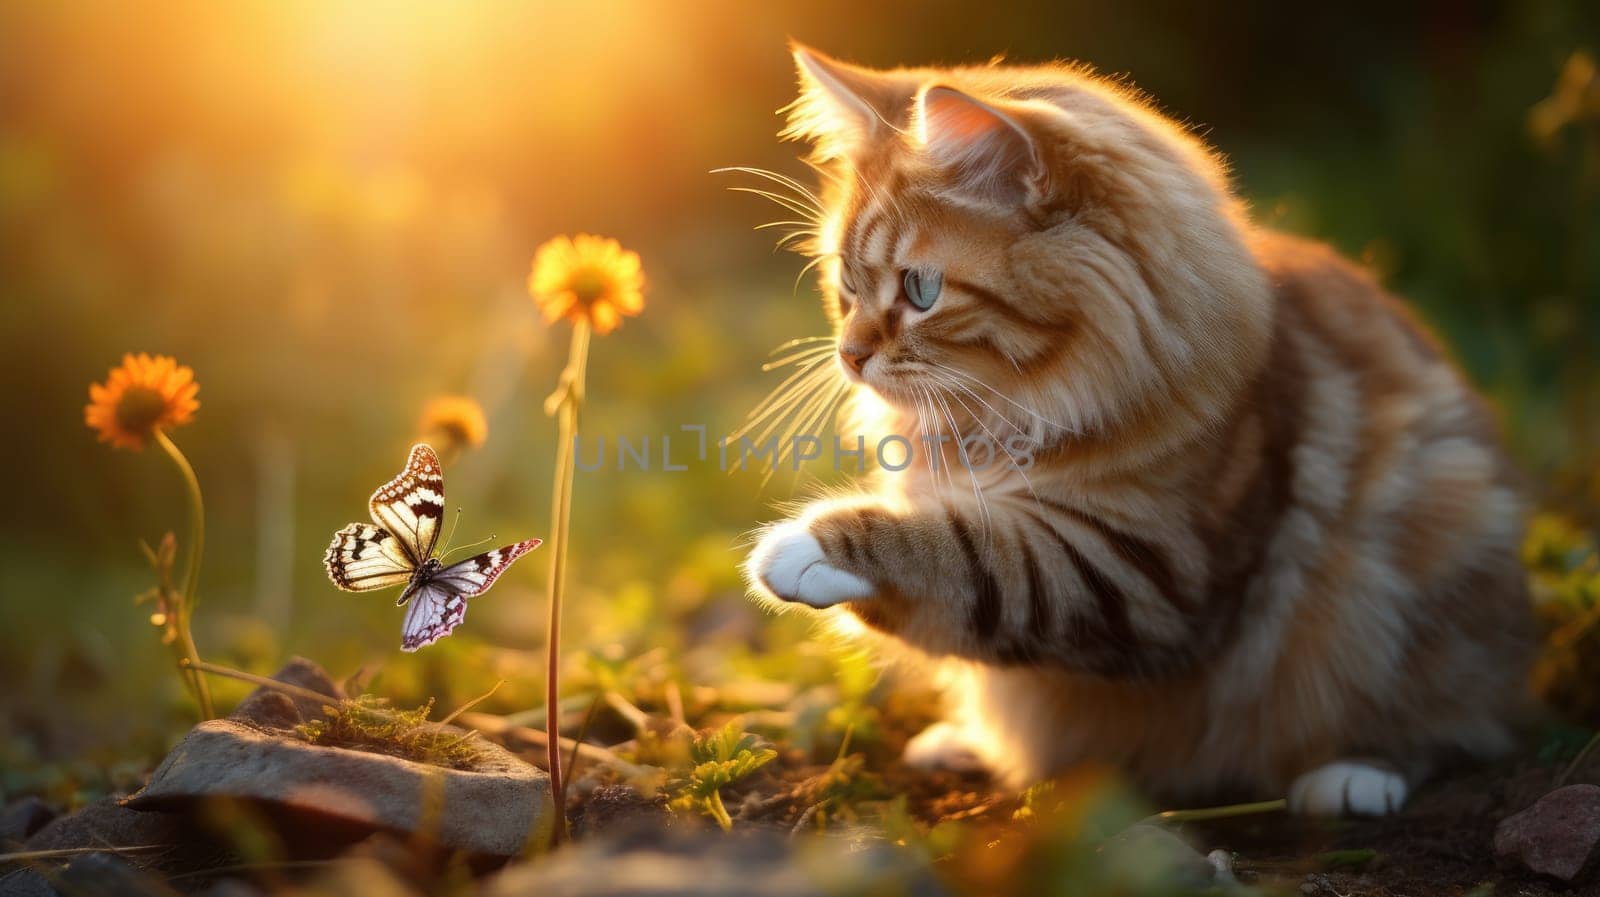 The cat catches a butterfly with its paw. Blurred sunny background by natali_brill